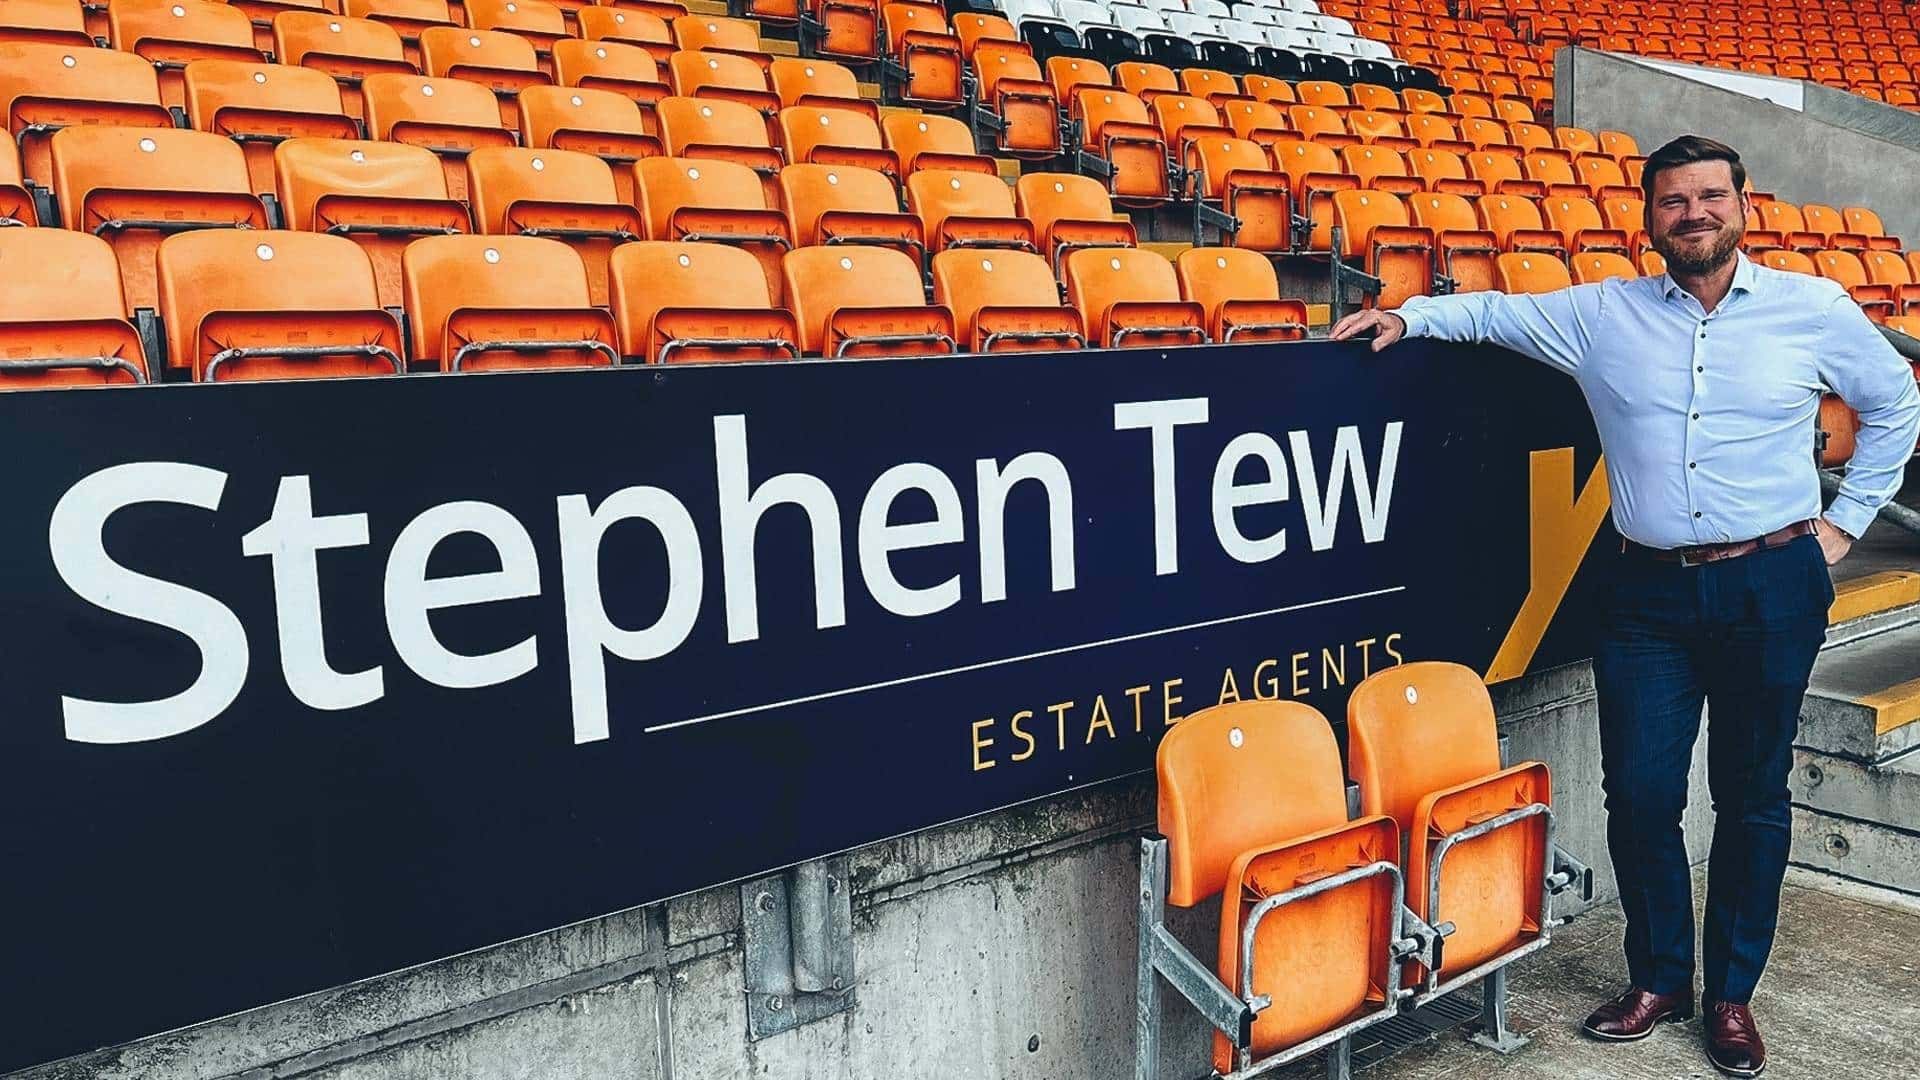 Blackpool Football Club is pleased to announce Stephen Tew Estate Agents as the latest Club Partner for the 23/24 season.